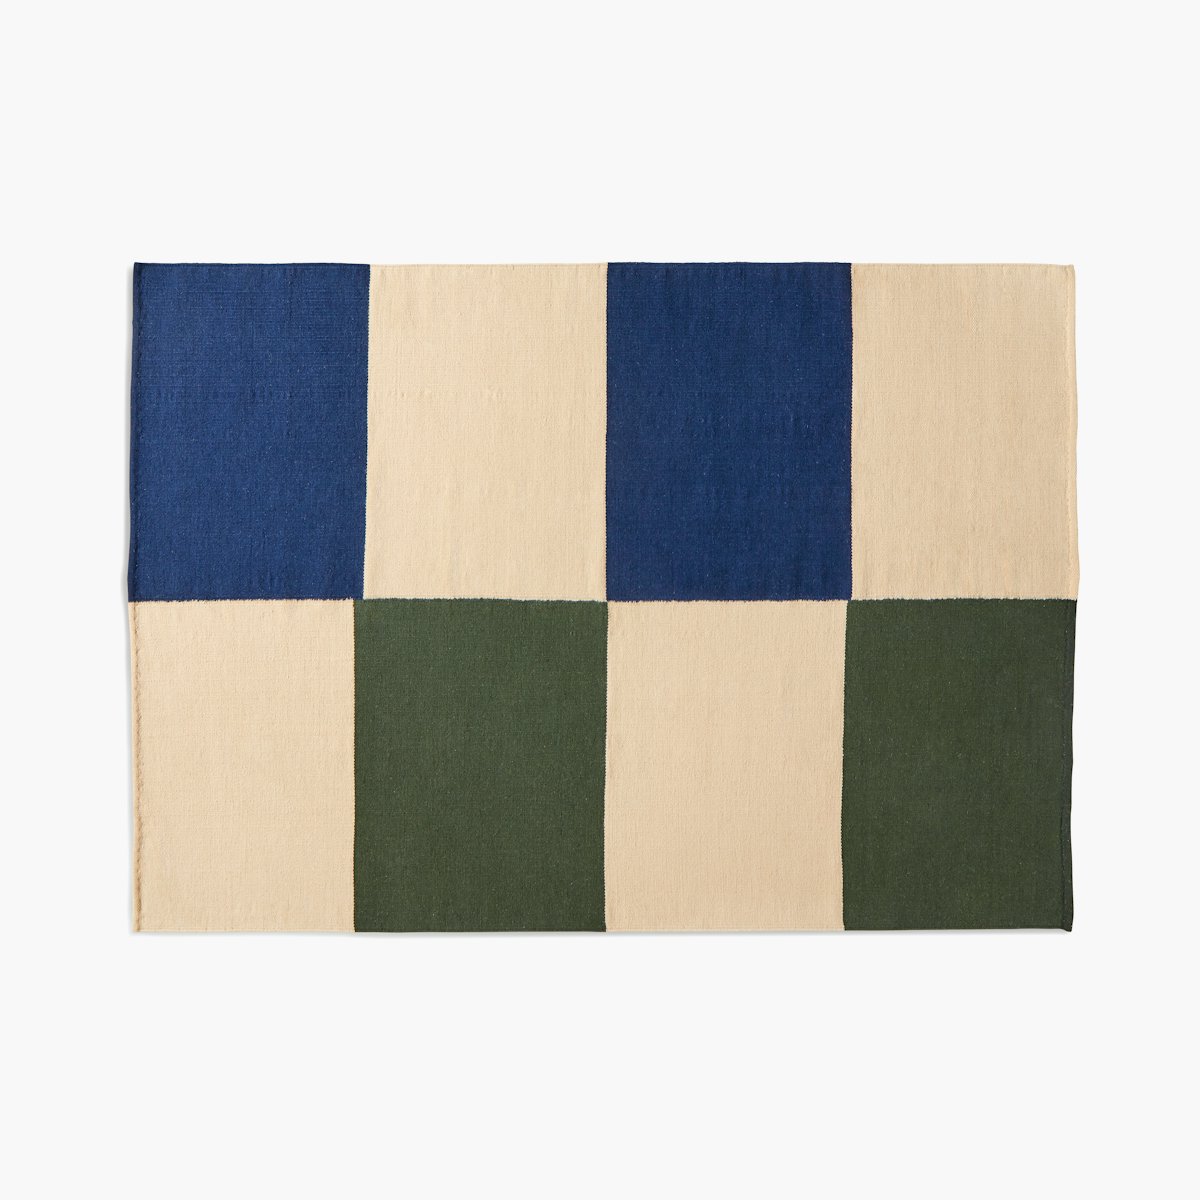 Ethan Cook Flat Works Rug